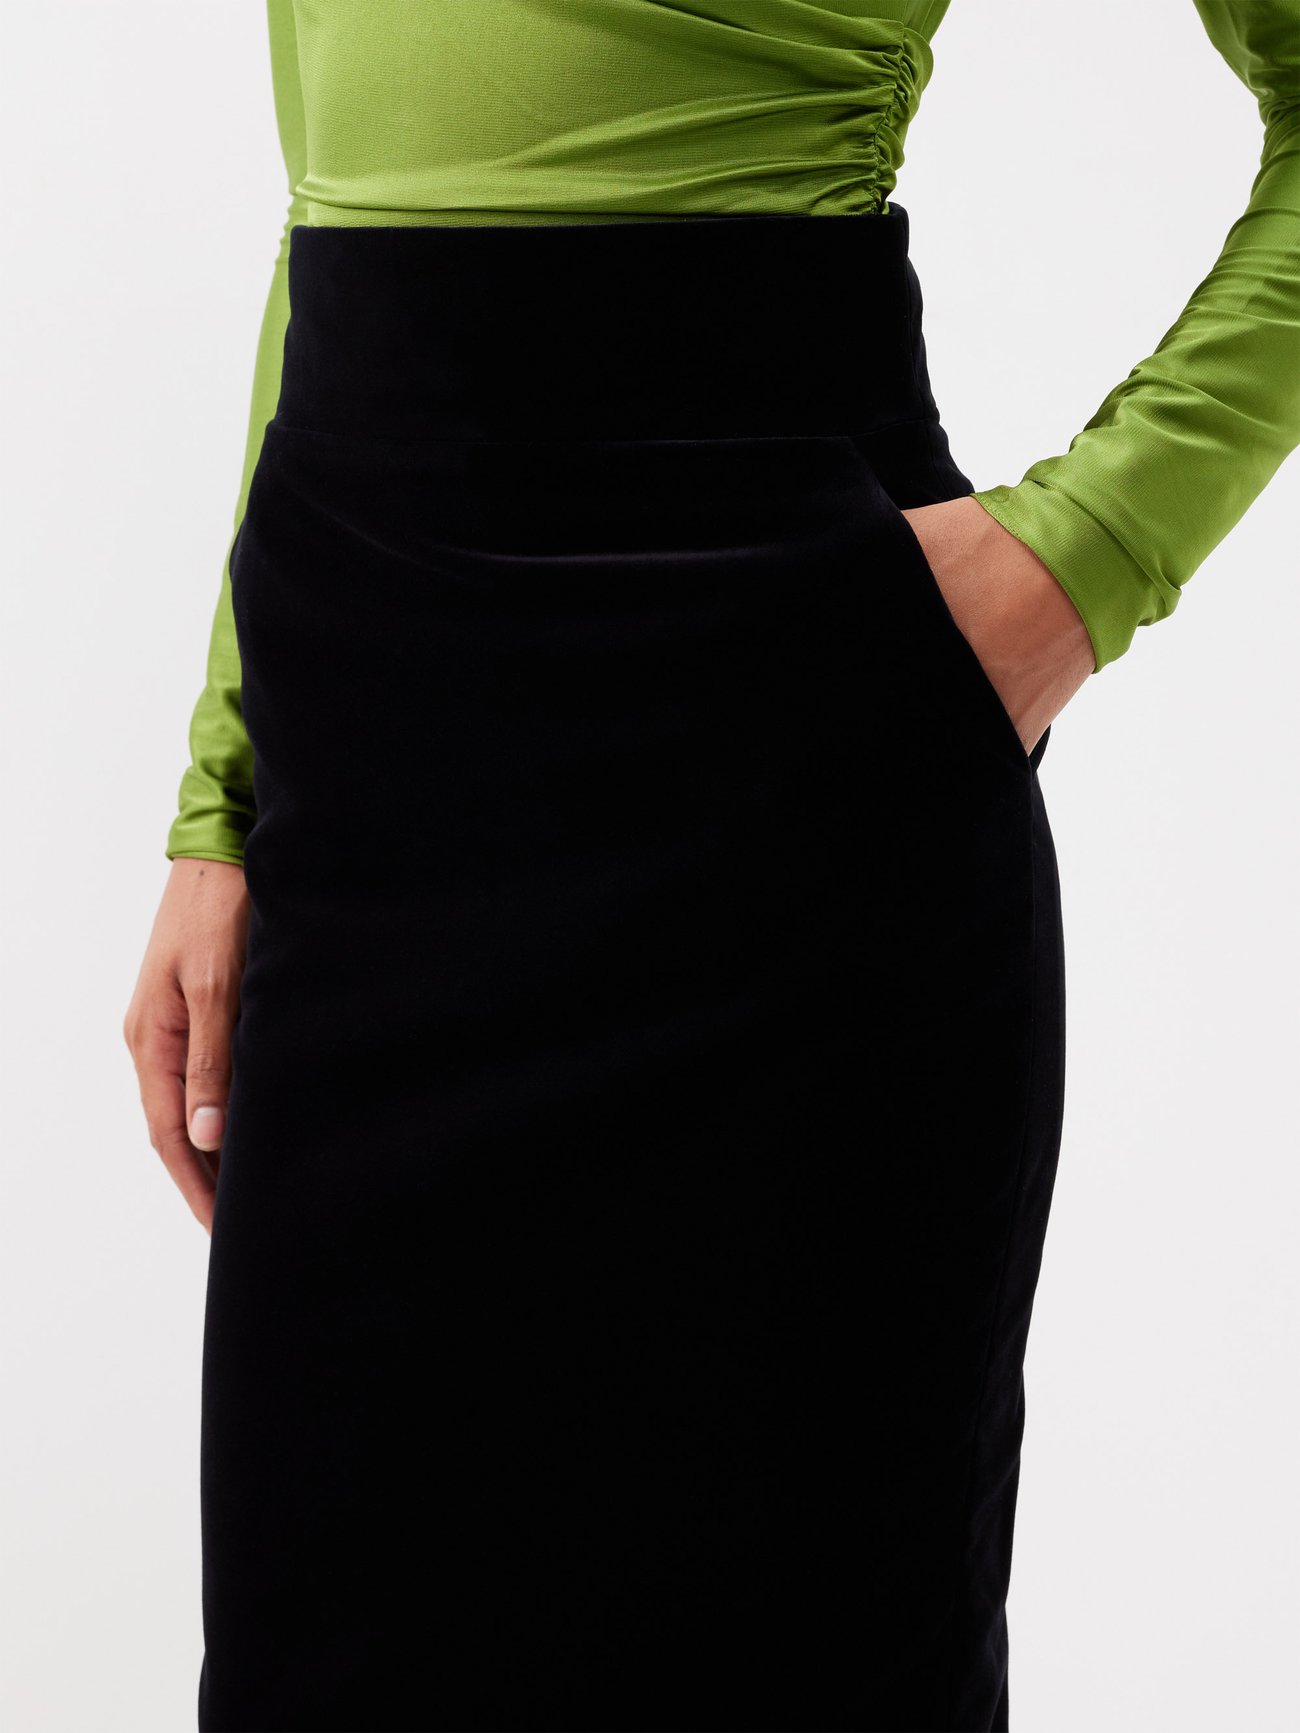 Alexandre Vauthier Ruched Pencil Skirt in Navy